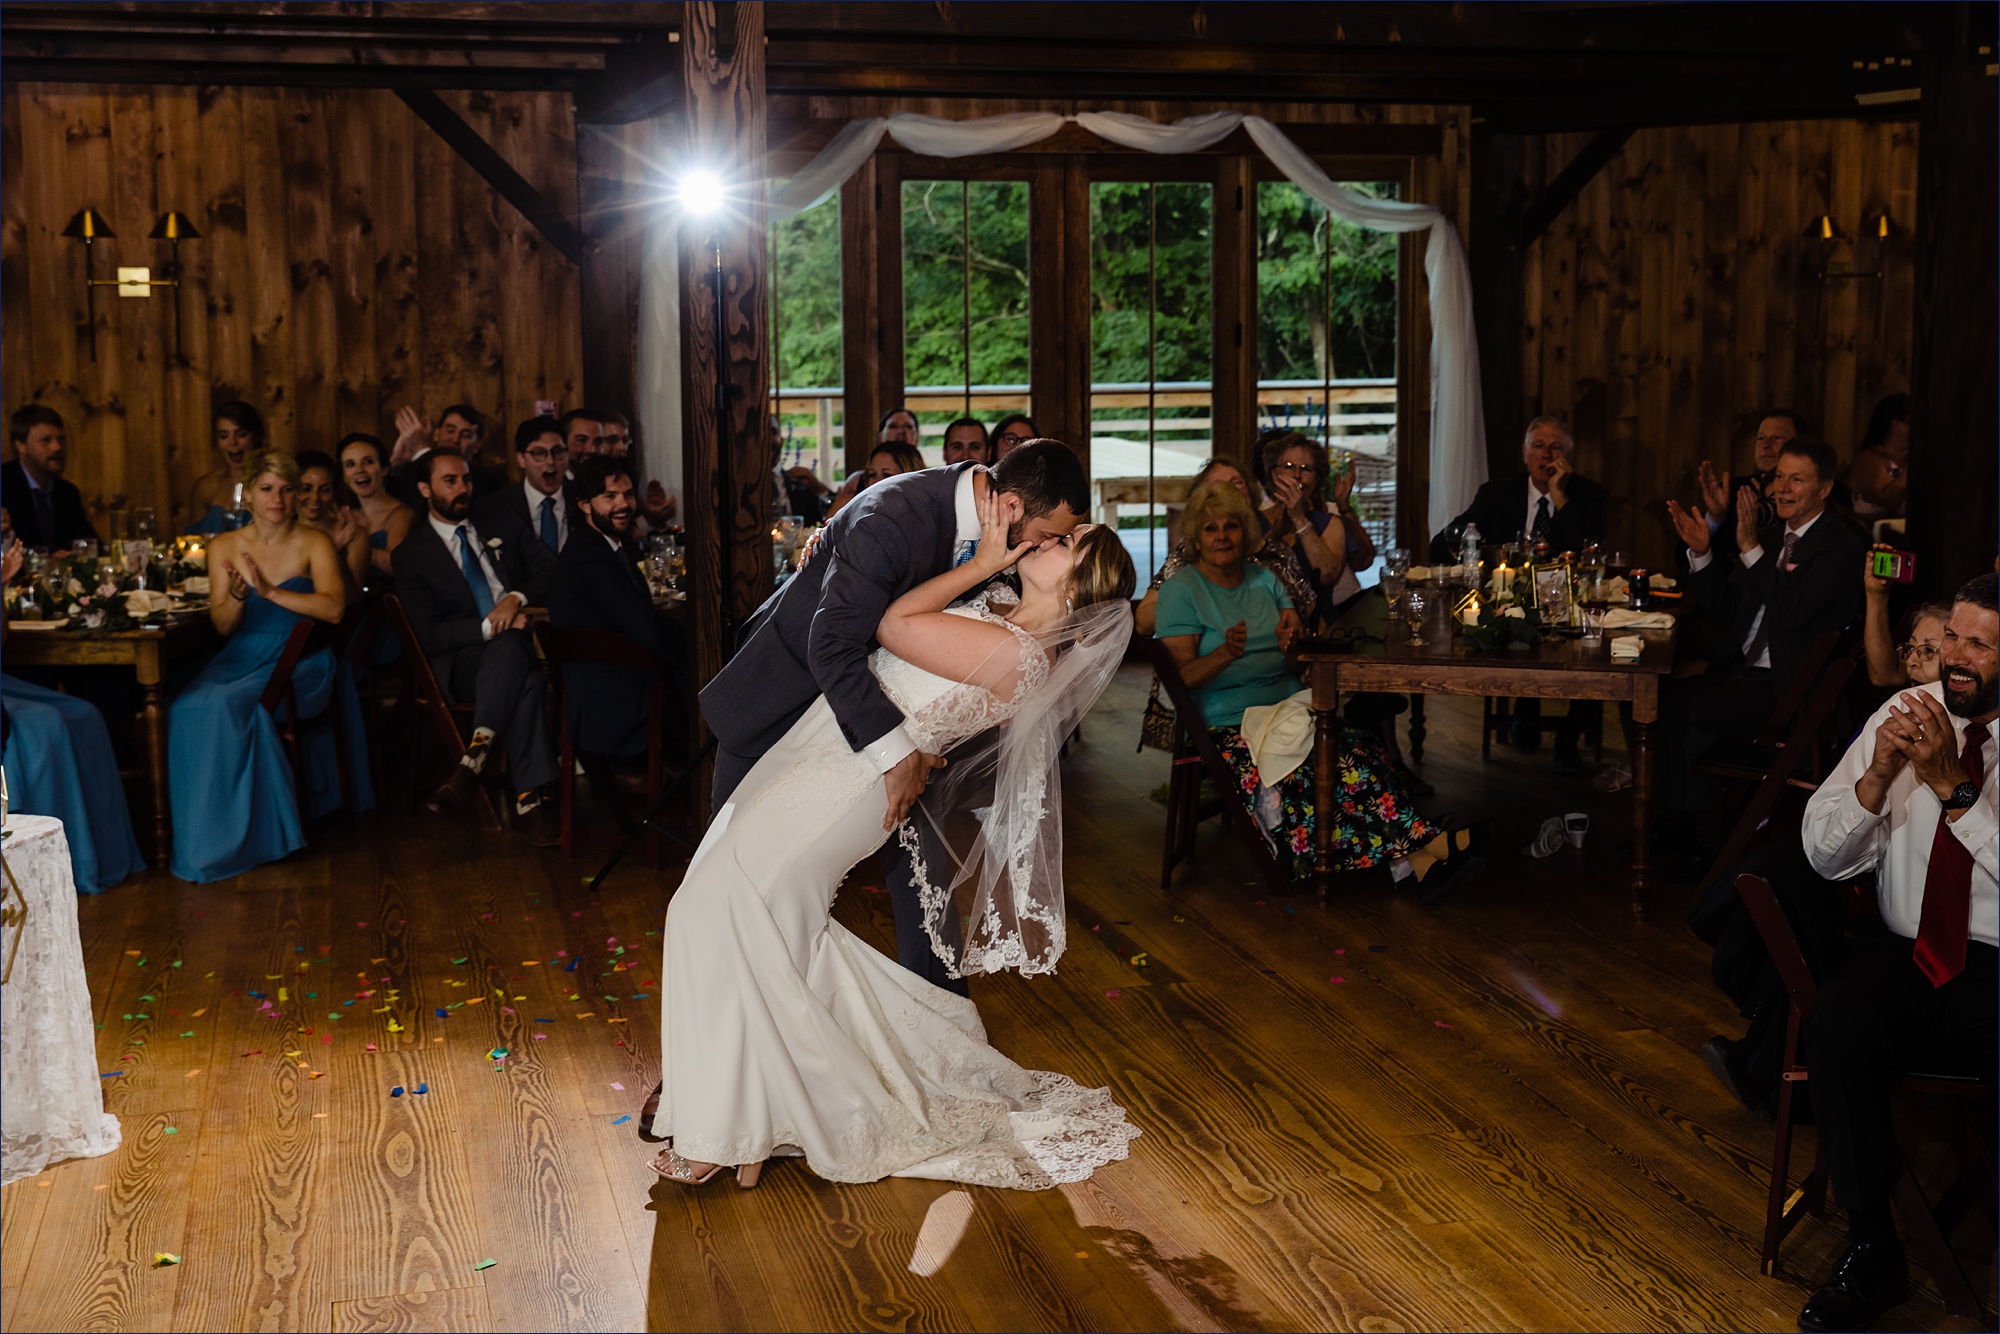 The groom expertly dips the bride in the barn at their Preserve at Chocorua wedding reception